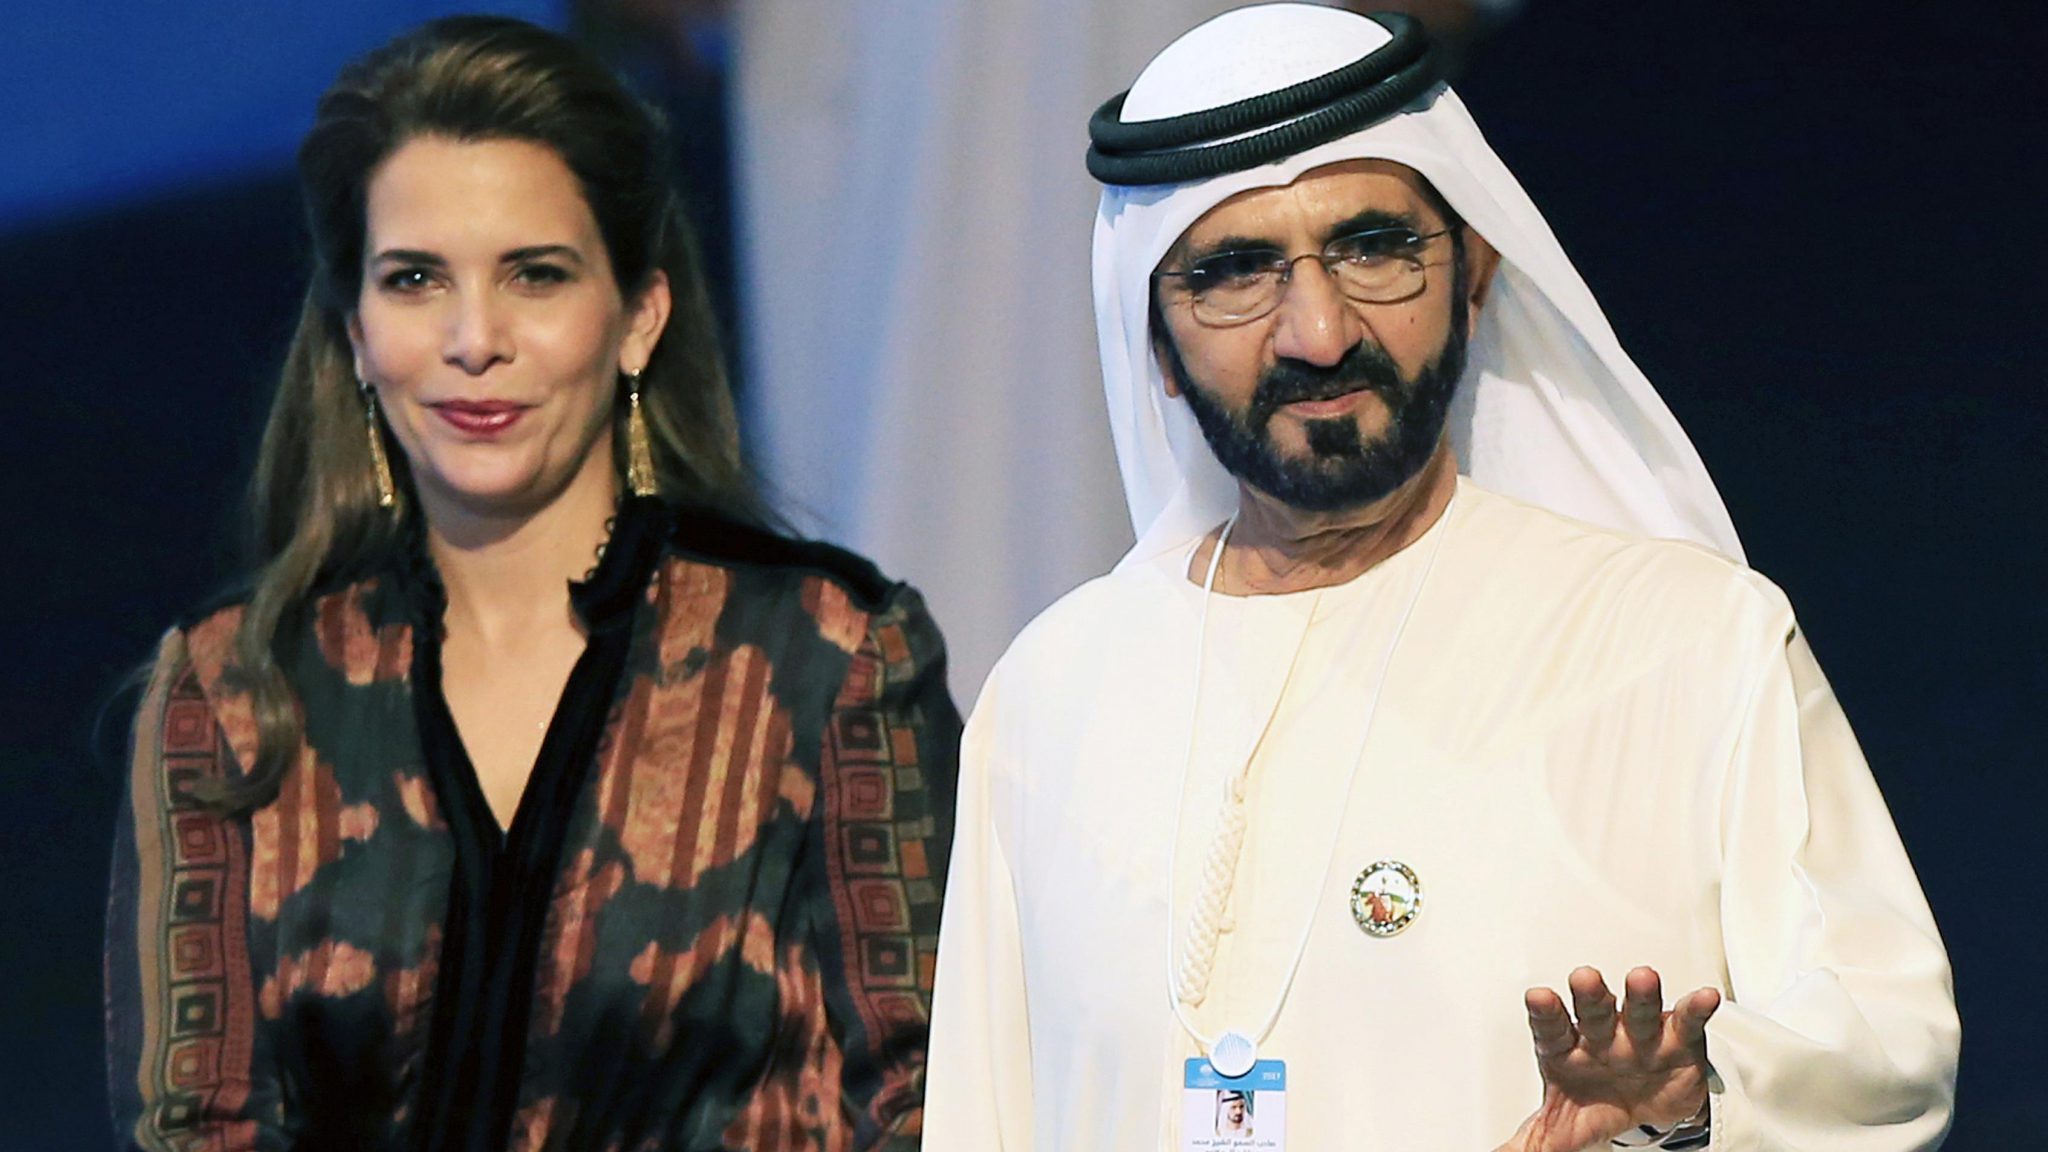 Sheikh Mohammed: Reopen ‘hacking’ case, Met urged